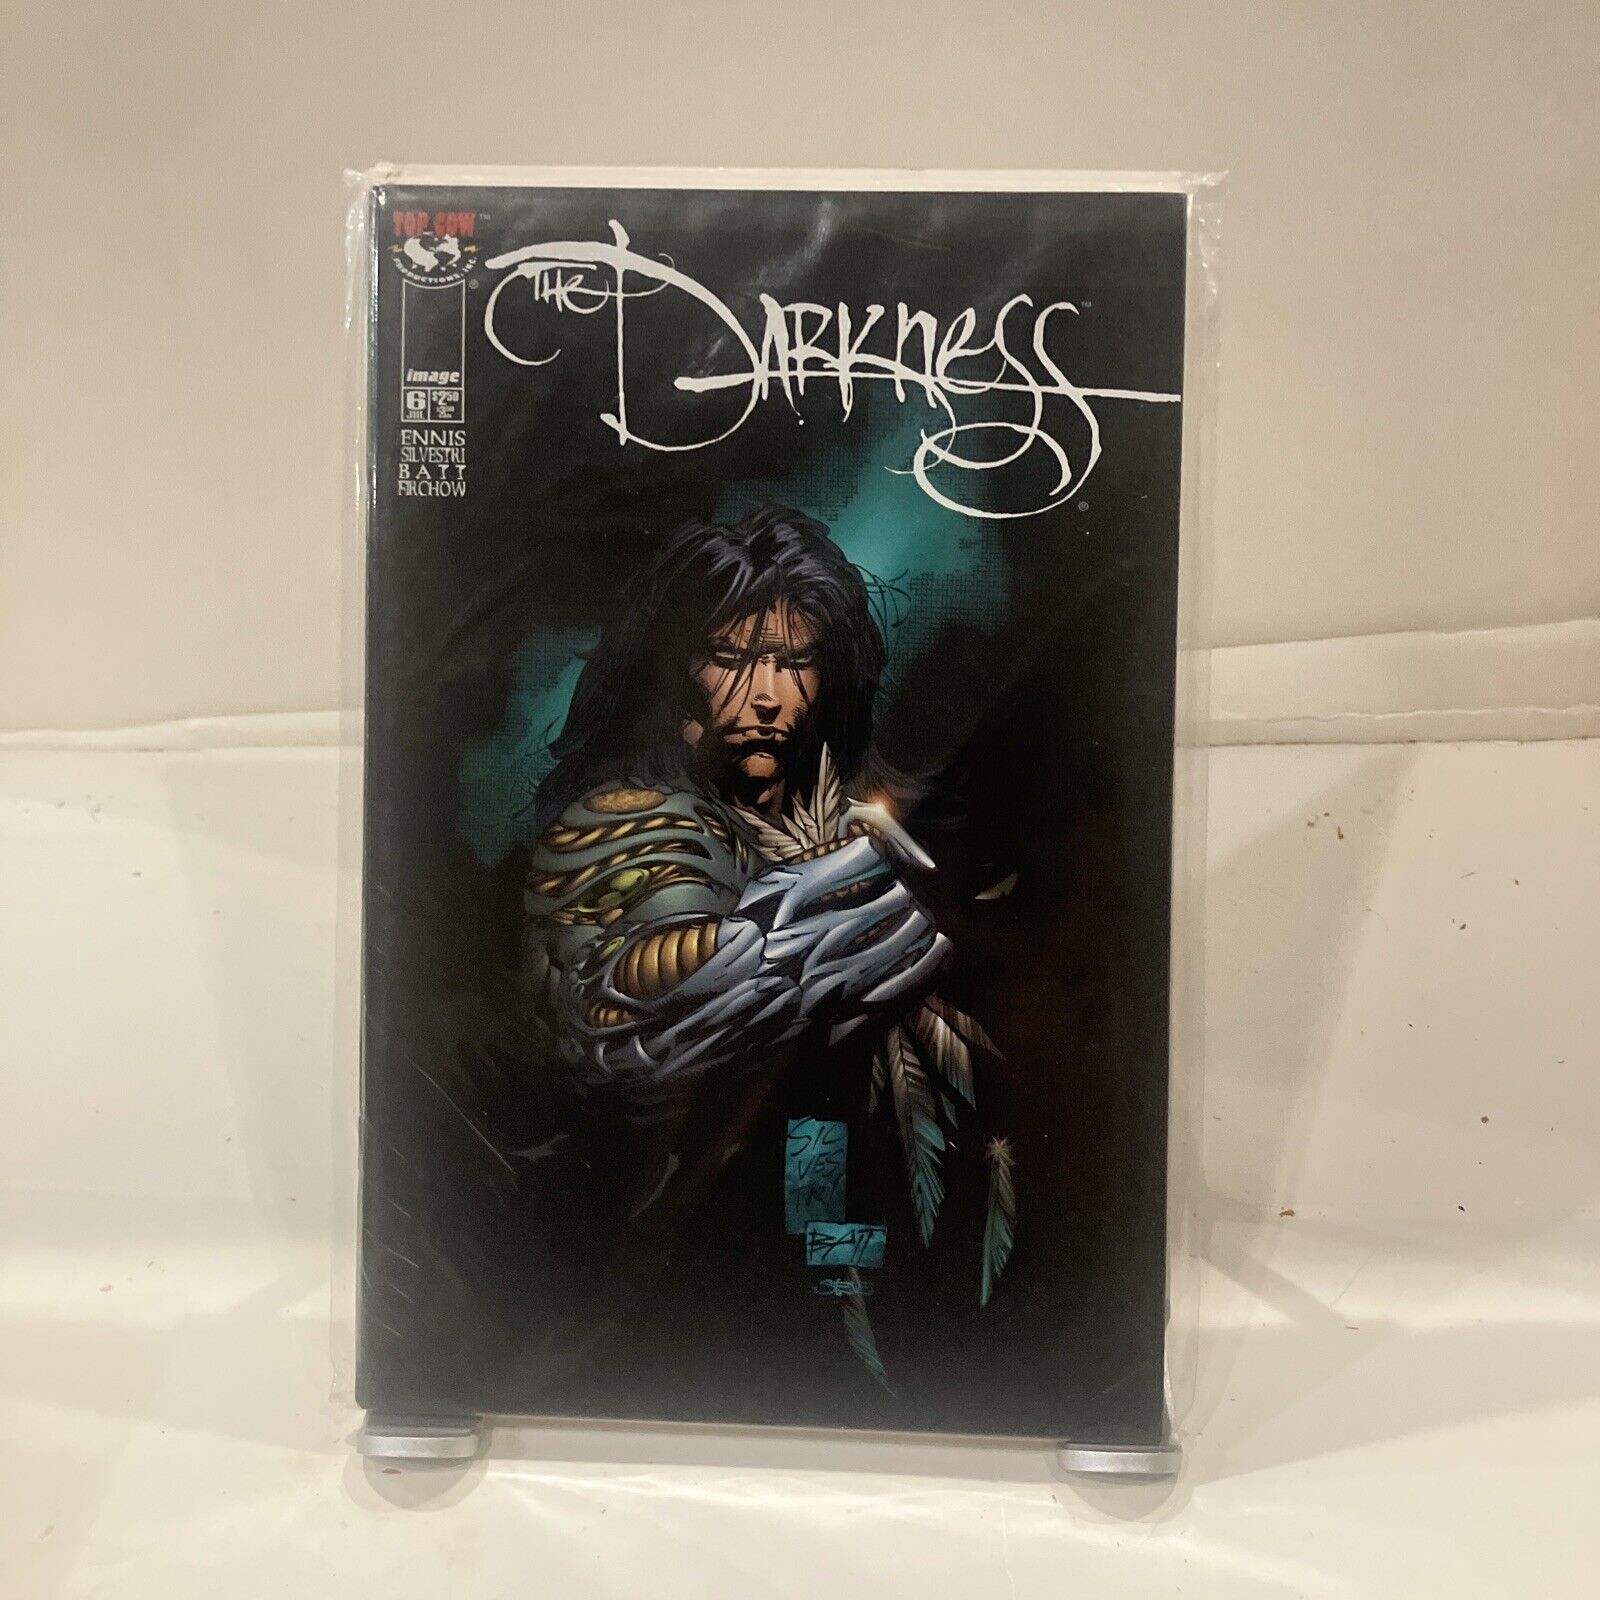 The Darkness Vol1 #6 Top Cow Image 1996